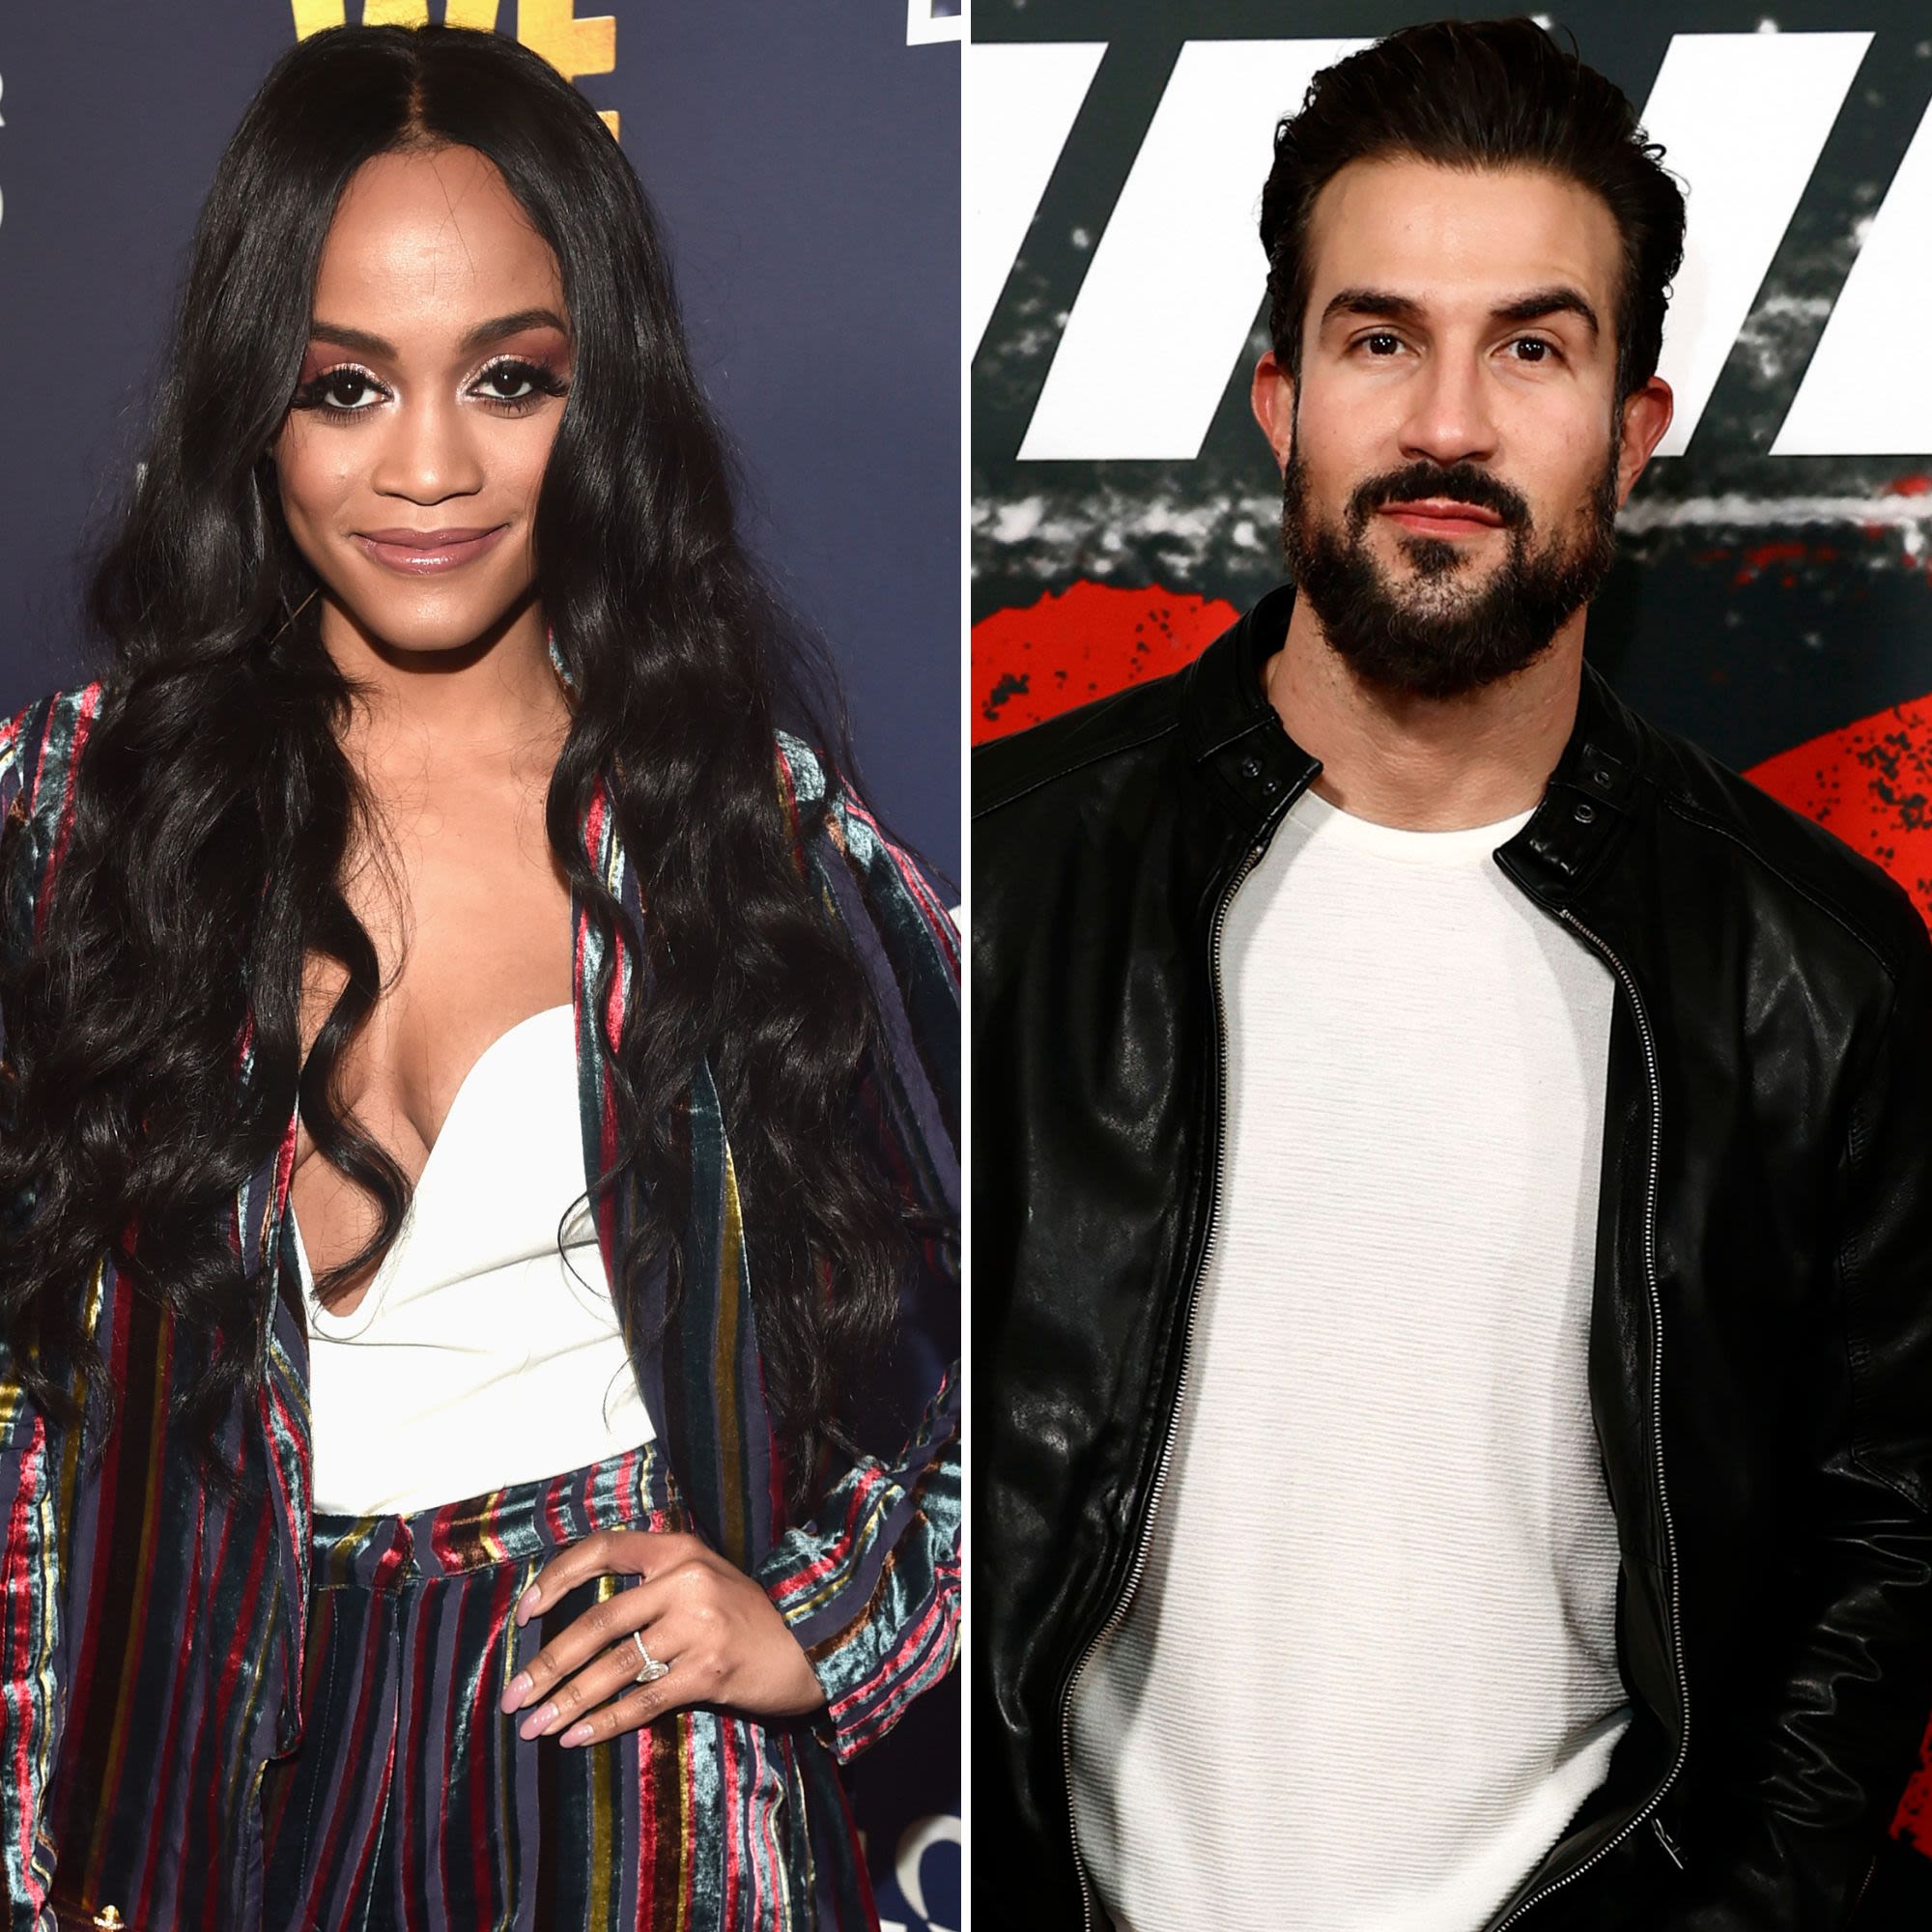 Bachelorette’s Rachel Lindsay Ordered to Pay Estranged Husband Bryan Abasolo $13K per Month in Temporary Support